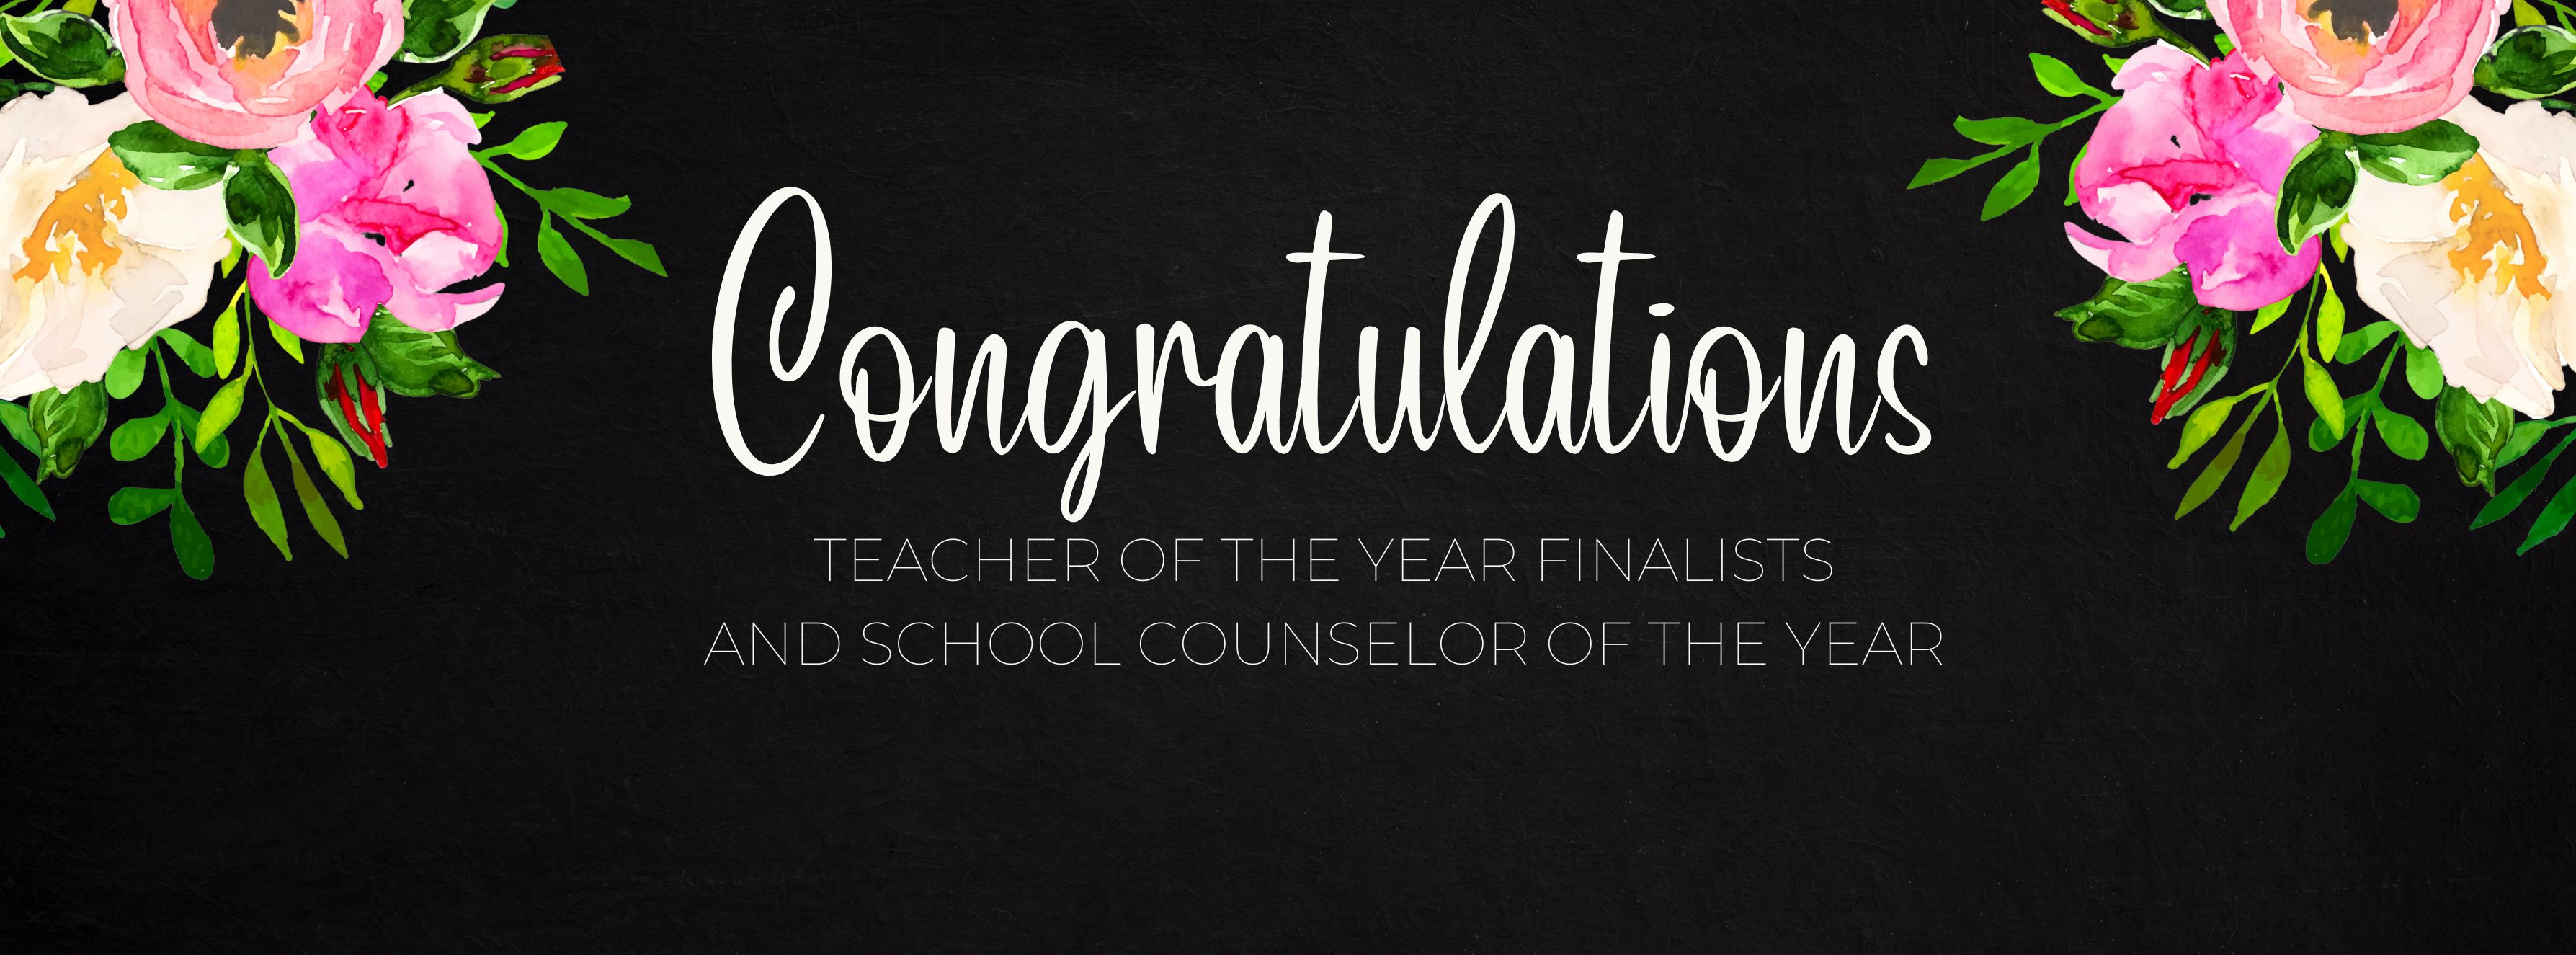 Teacher of the Year Finalists and Counselor of the Year 